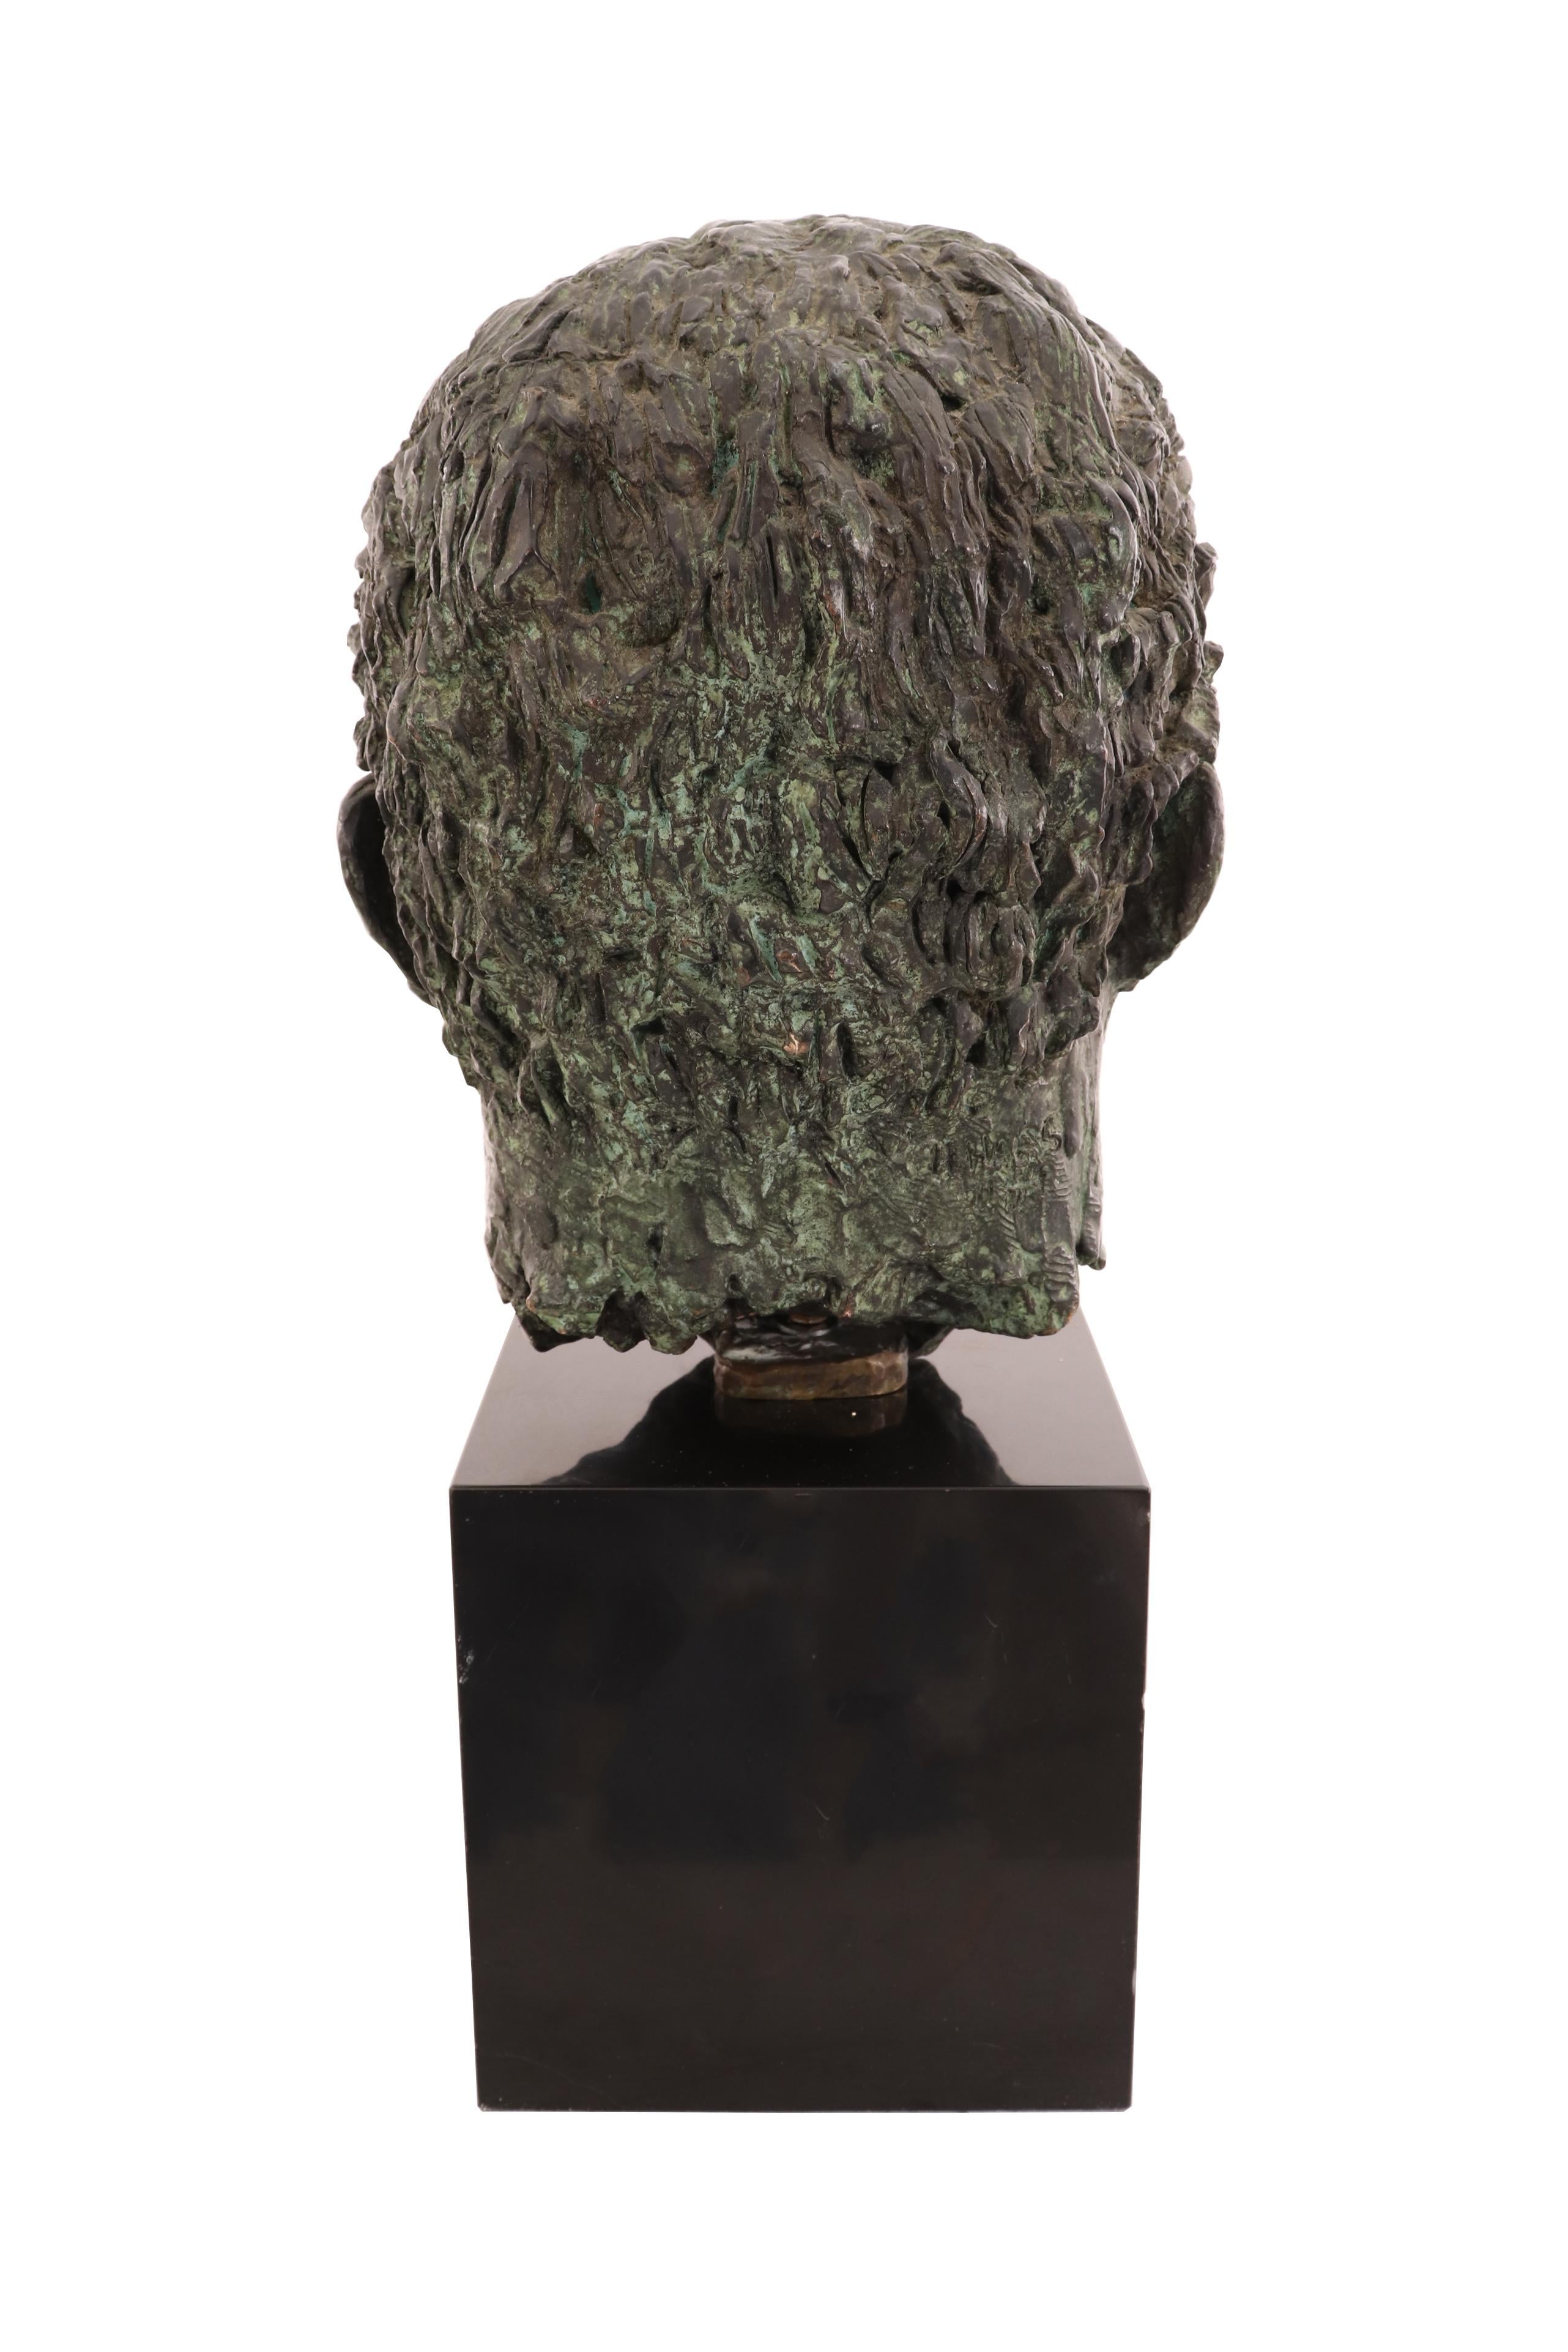 American Bronze Bust of a Man's Head For Sale